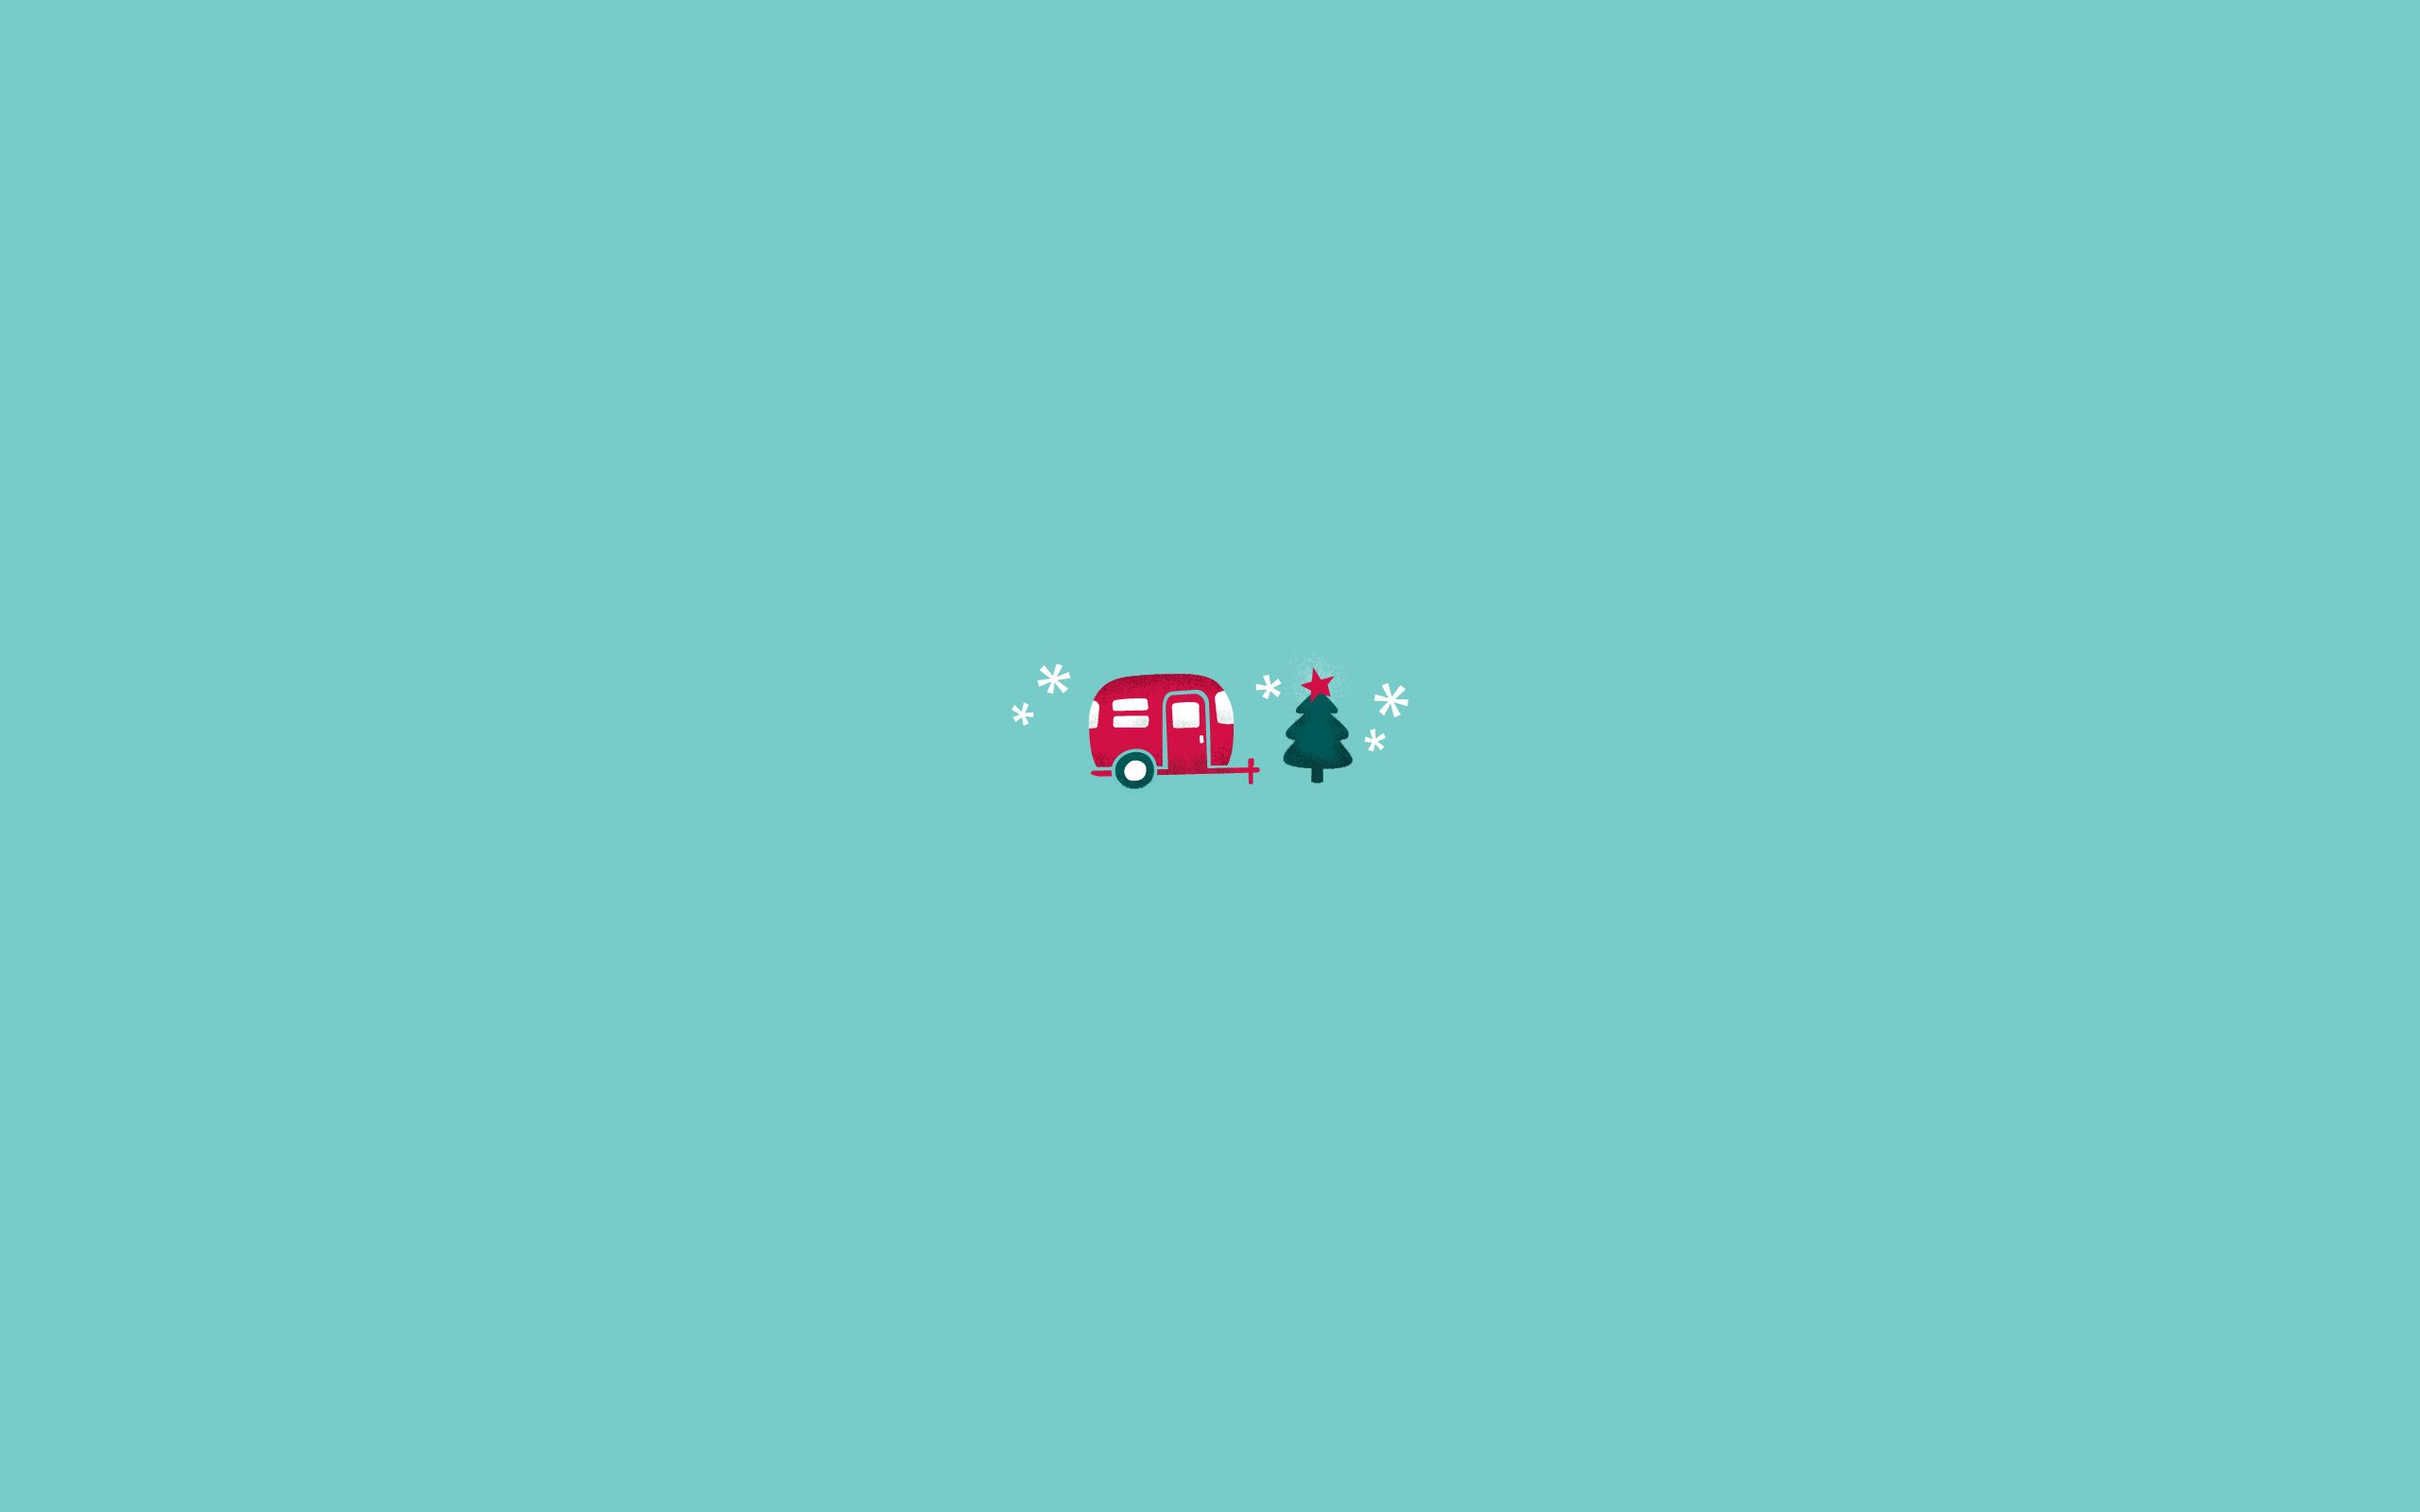 Cute Christmas Aesthetic Laptop Wallpapers - Wallpaper Cave